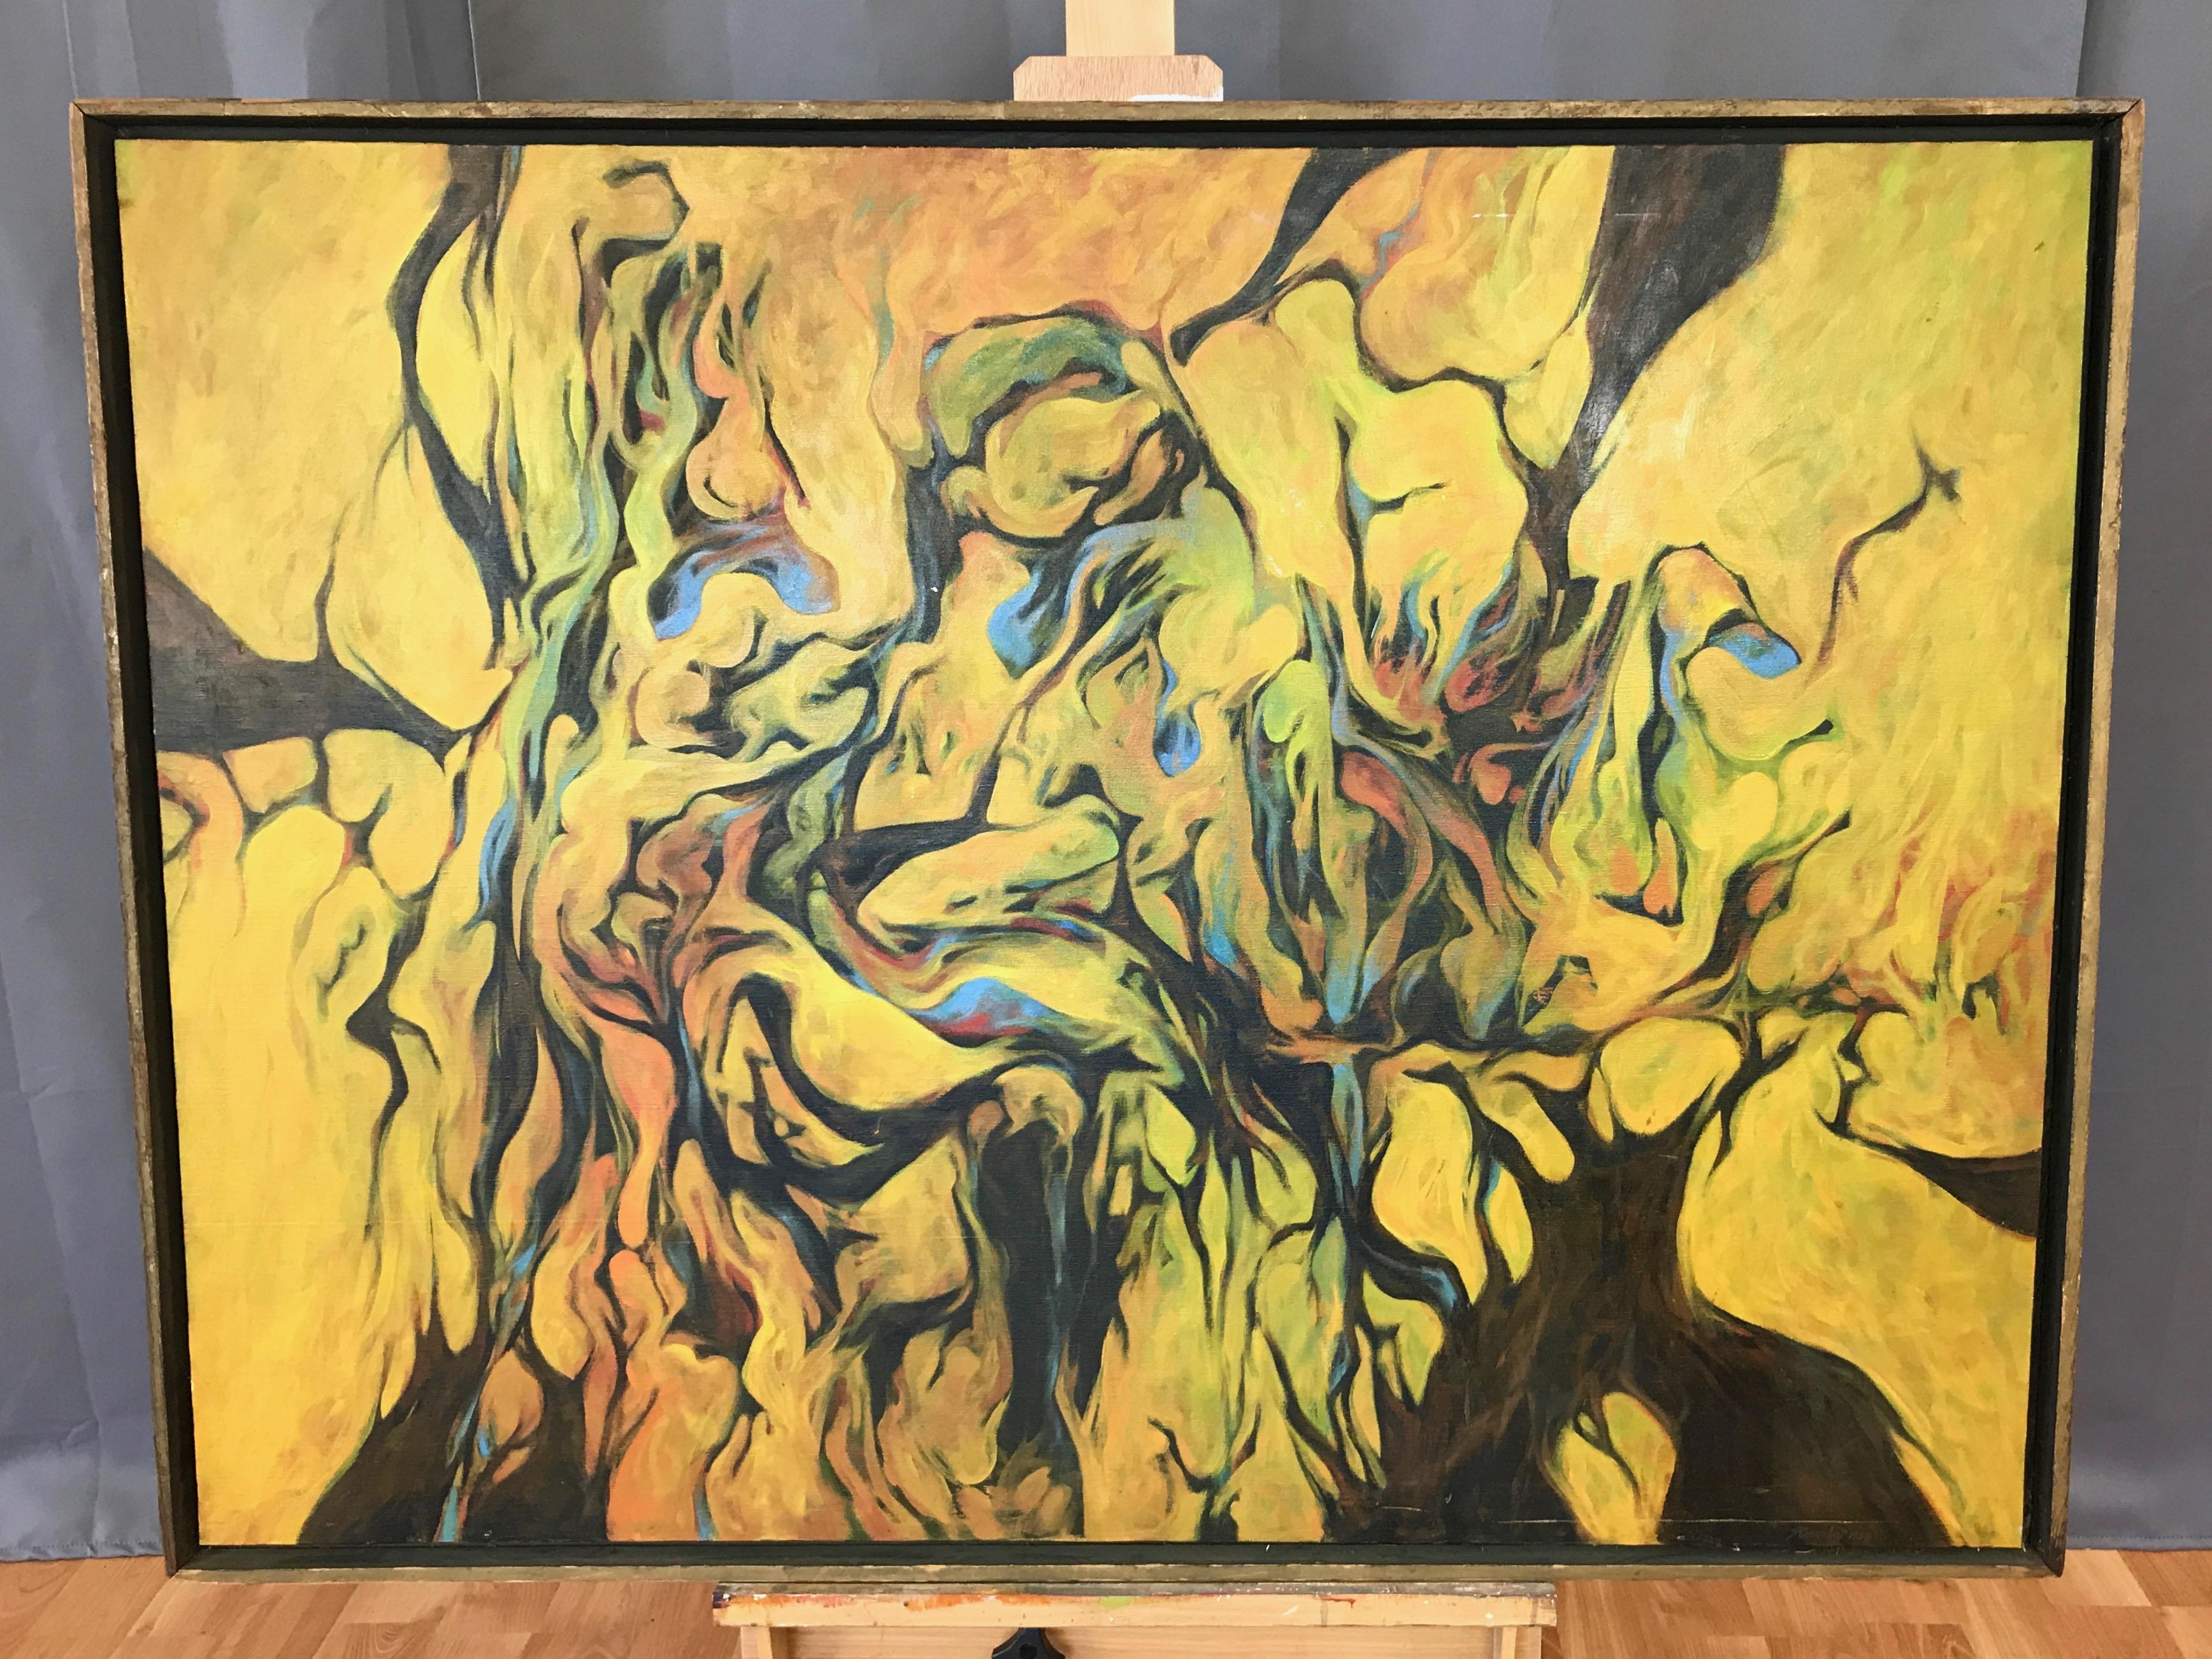 A very early and expansive abstract impressionist or surrealist oil painting by listed California artist and educator Ron Ownbey (b. 1938) in original custom frame.

An impressively sized and engaging early example of Ownbey’s distinctive organic